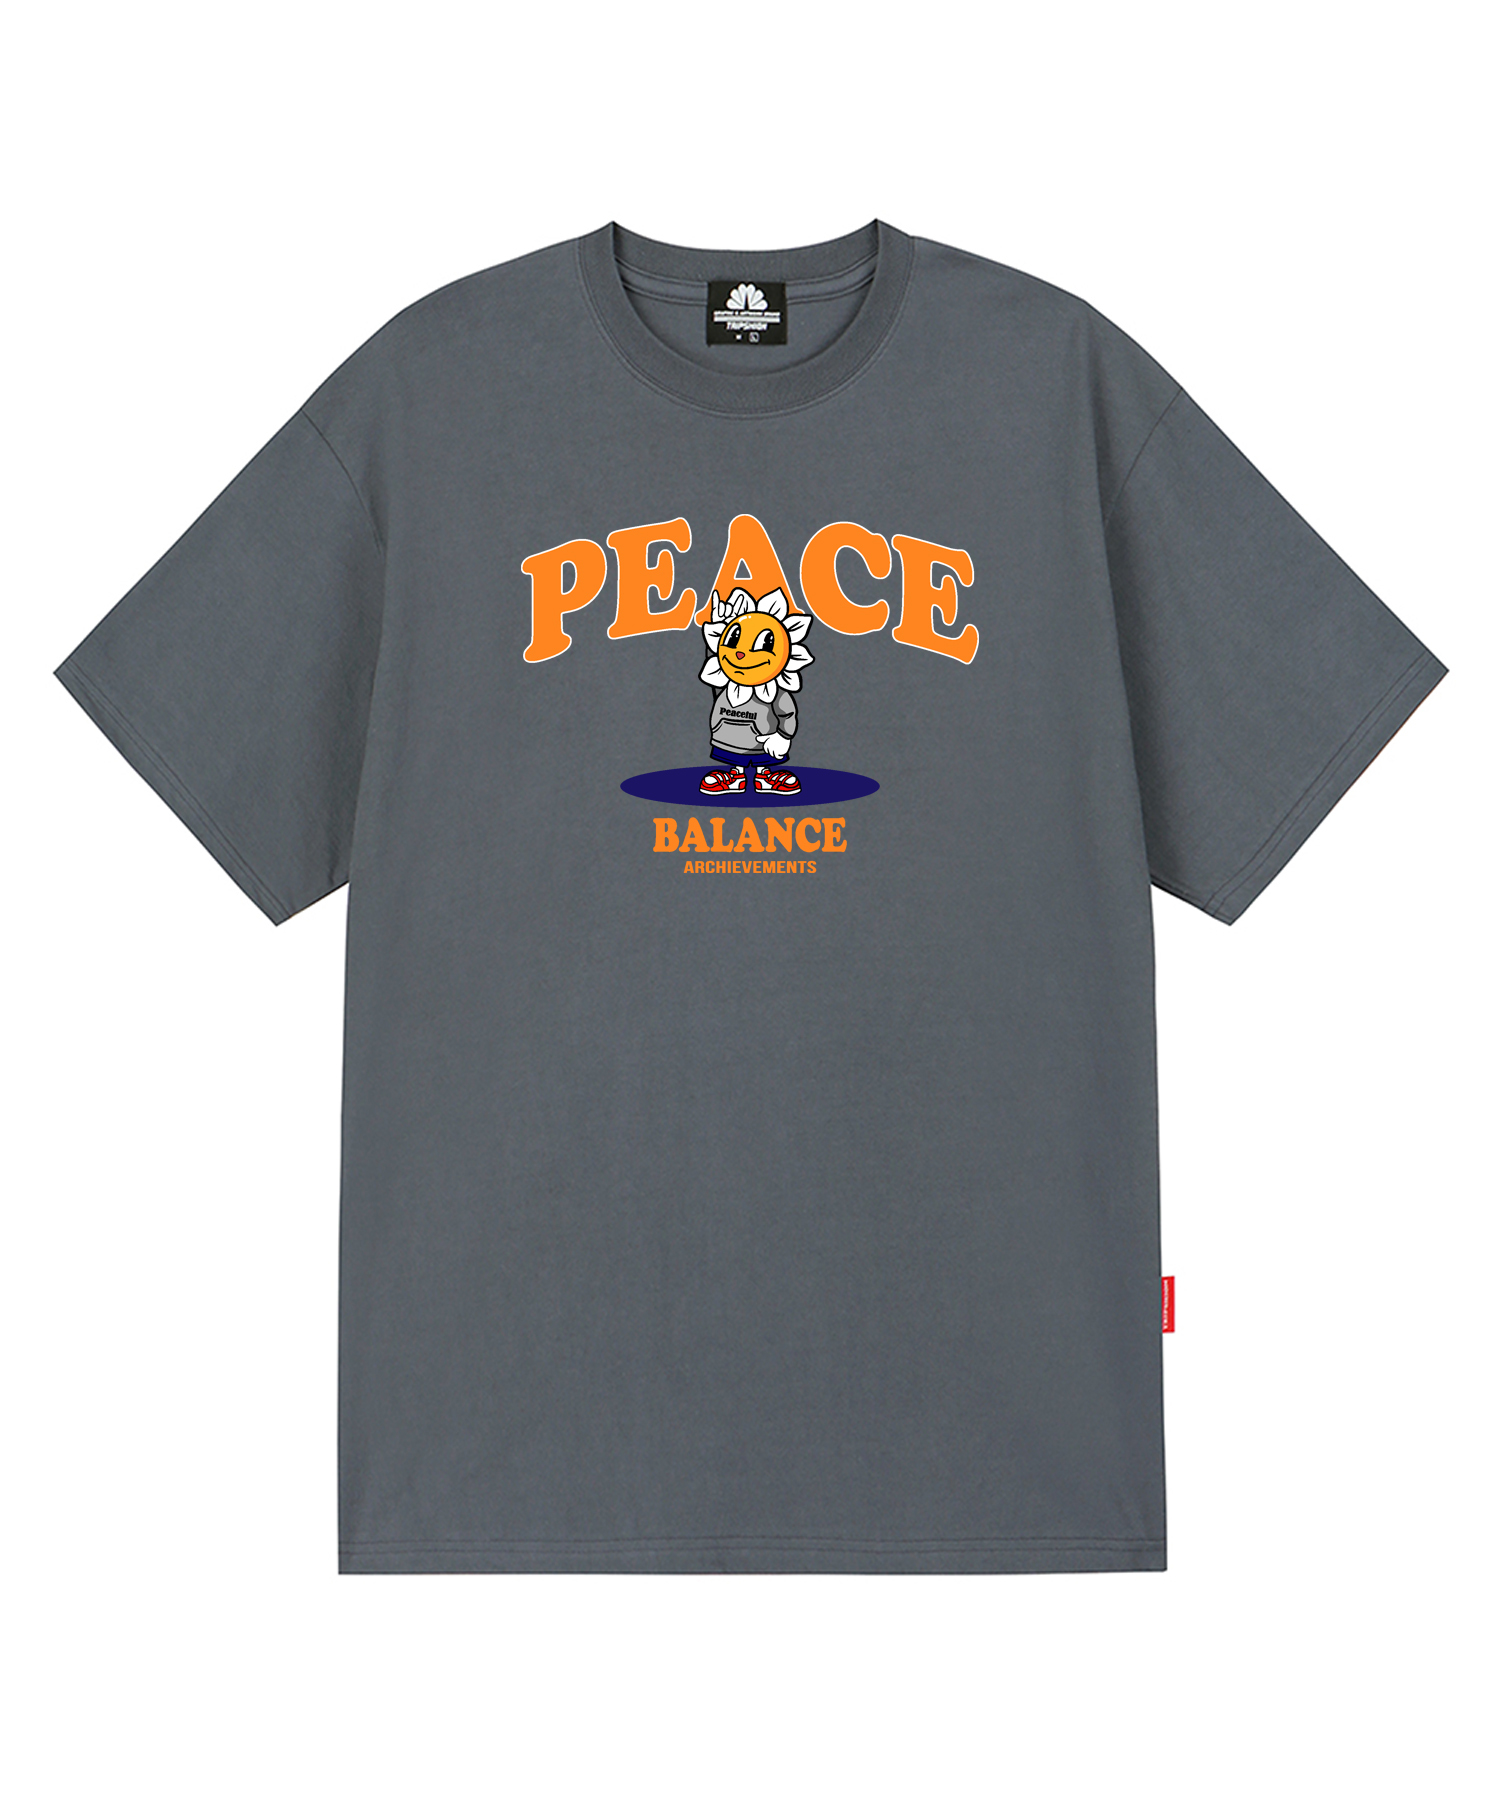 PEACE TIGER GRAPHIC T-SHIRTS - GRAY